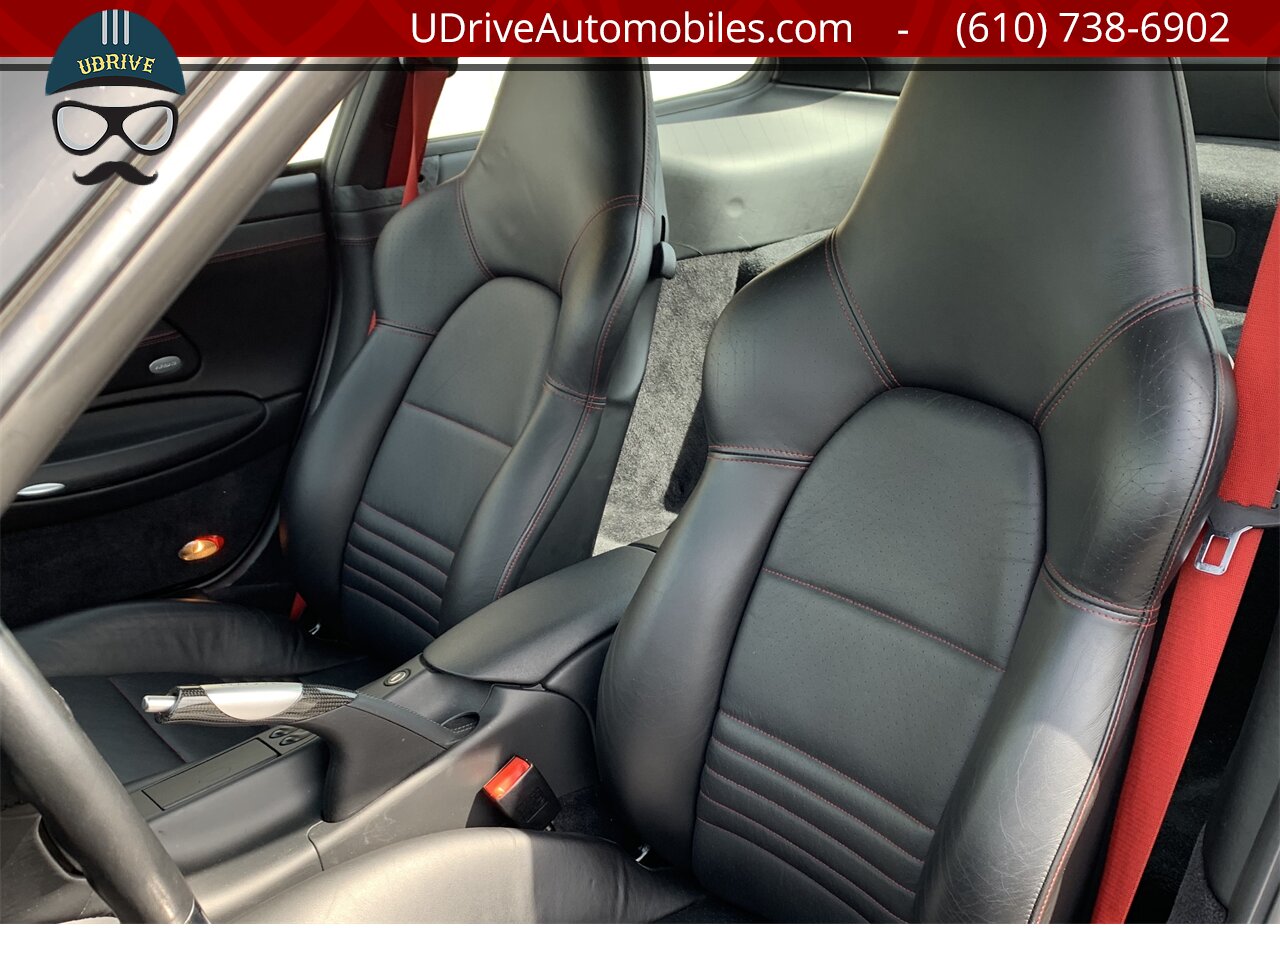 2004 Porsche 911 GT3 996 PCCB Sport Seats Red Stitching $118k MSRP   - Photo 11 - West Chester, PA 19382